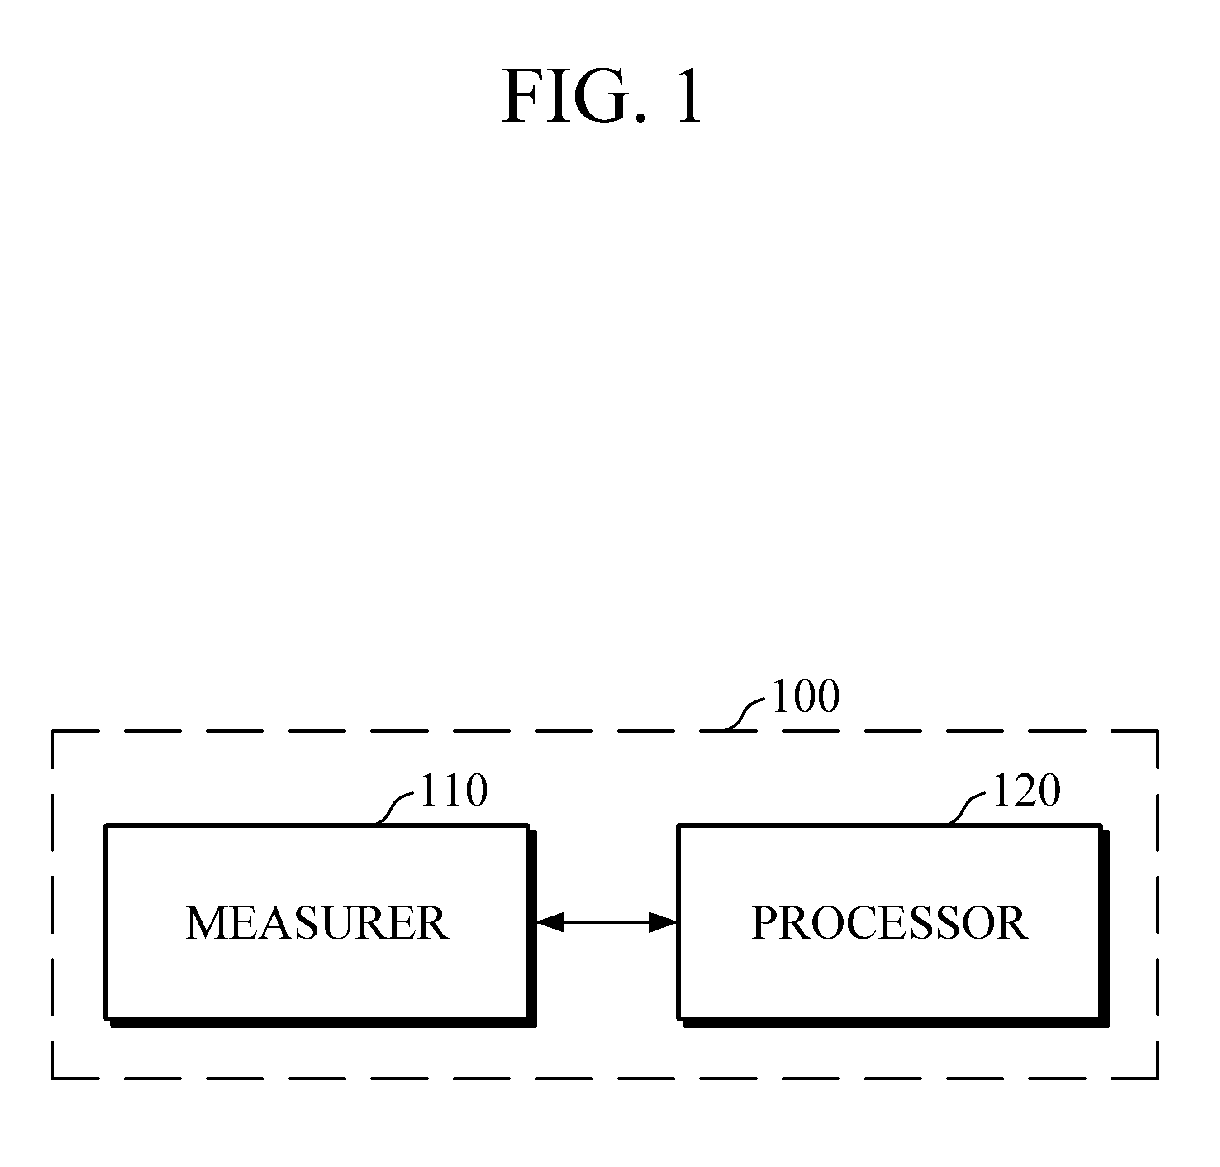 Apparatus and method for estimating biological component